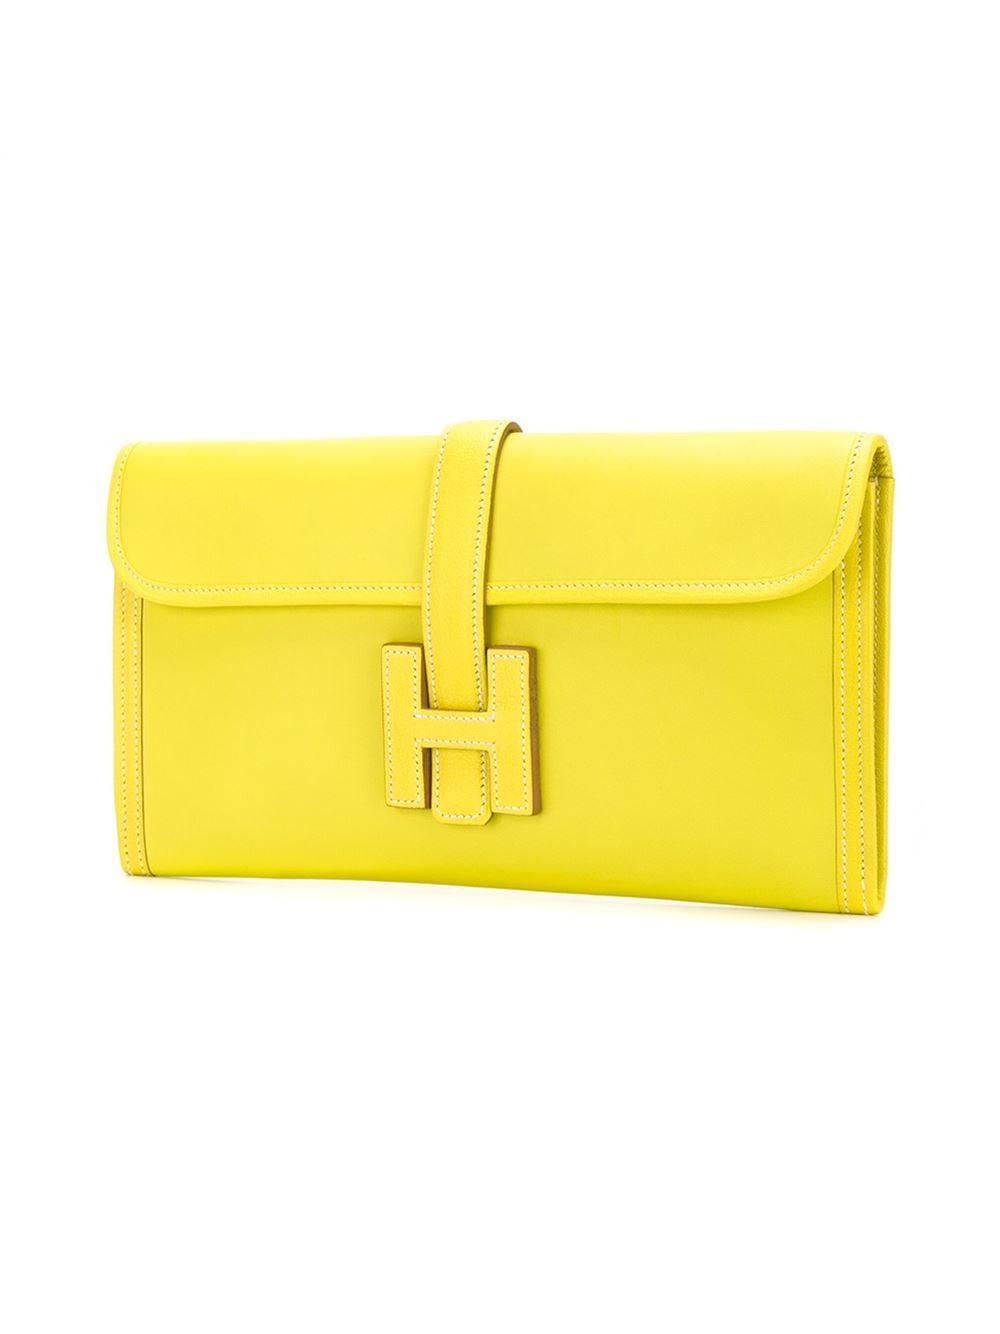 Yellow Swift leather embossed logo clutch from Hermès featuring a rectangular body, a stitch detail, a foldover top, a strap closure and a main internal compartment. 

Colour: Yellow (Sulphur)

Material: Swift Leather

Measurements: W: 29cm